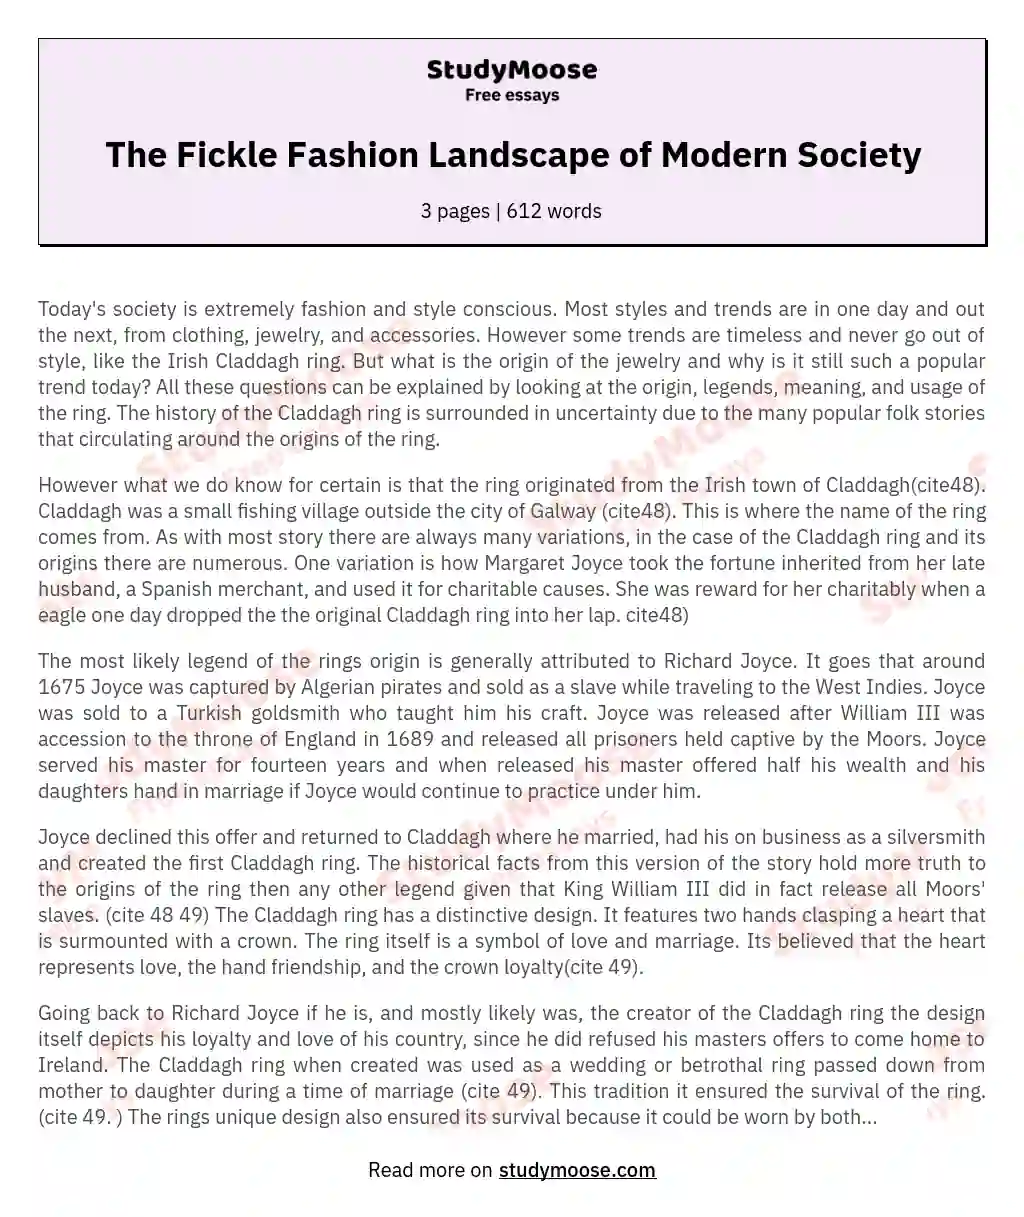 The Fickle Fashion Landscape of Modern Society essay